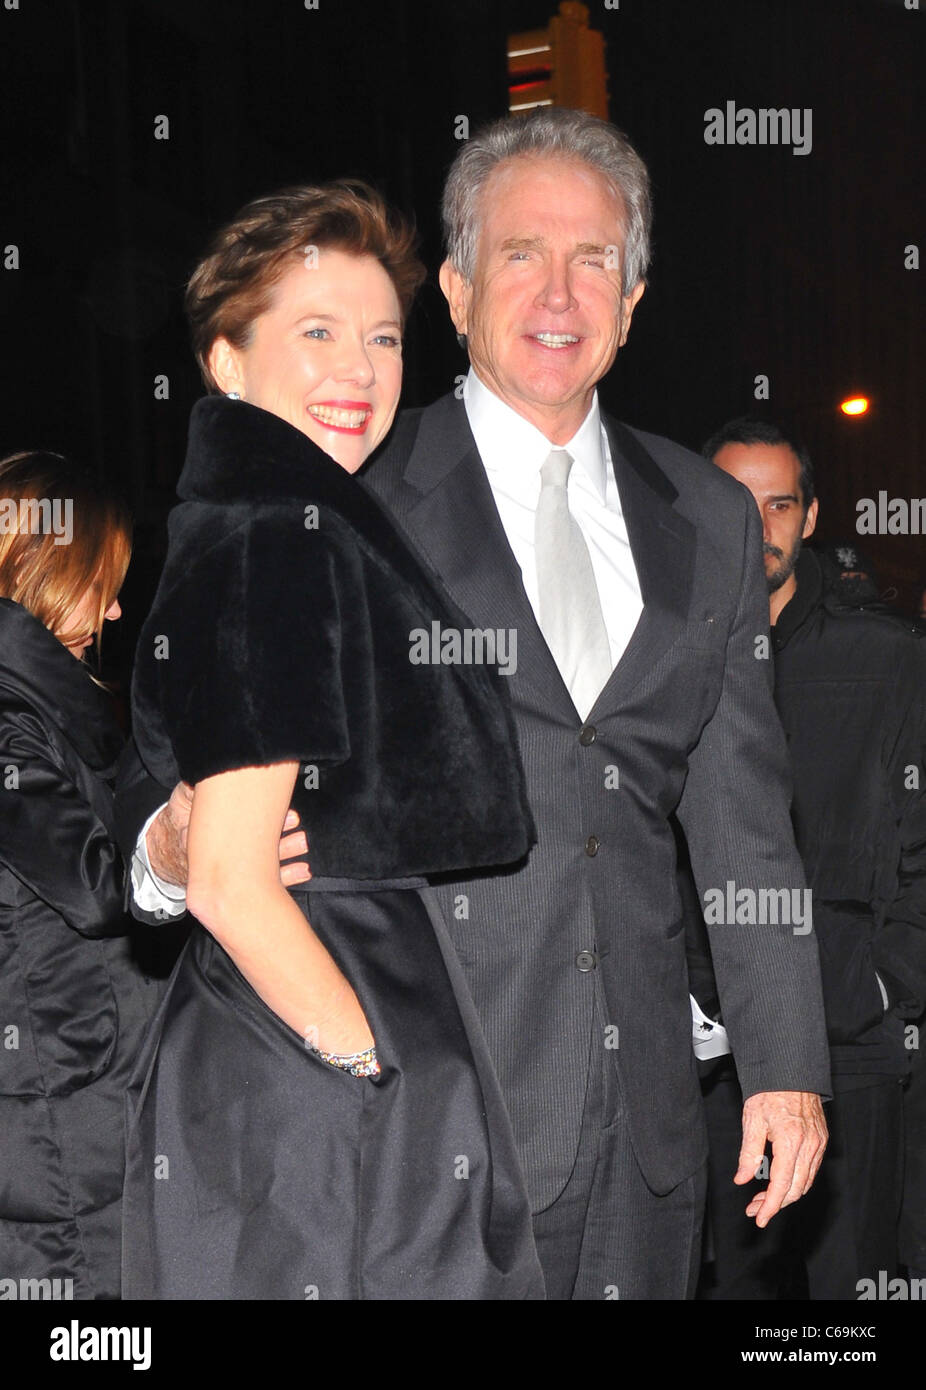 Annette Bening, Warren Beatty at arrivals for The New York Film Critics Circle Awards, Crimson, New York, NY January 10, 2011. Photo By: Gregorio T. Binuya/Everett Collection Stock Photo